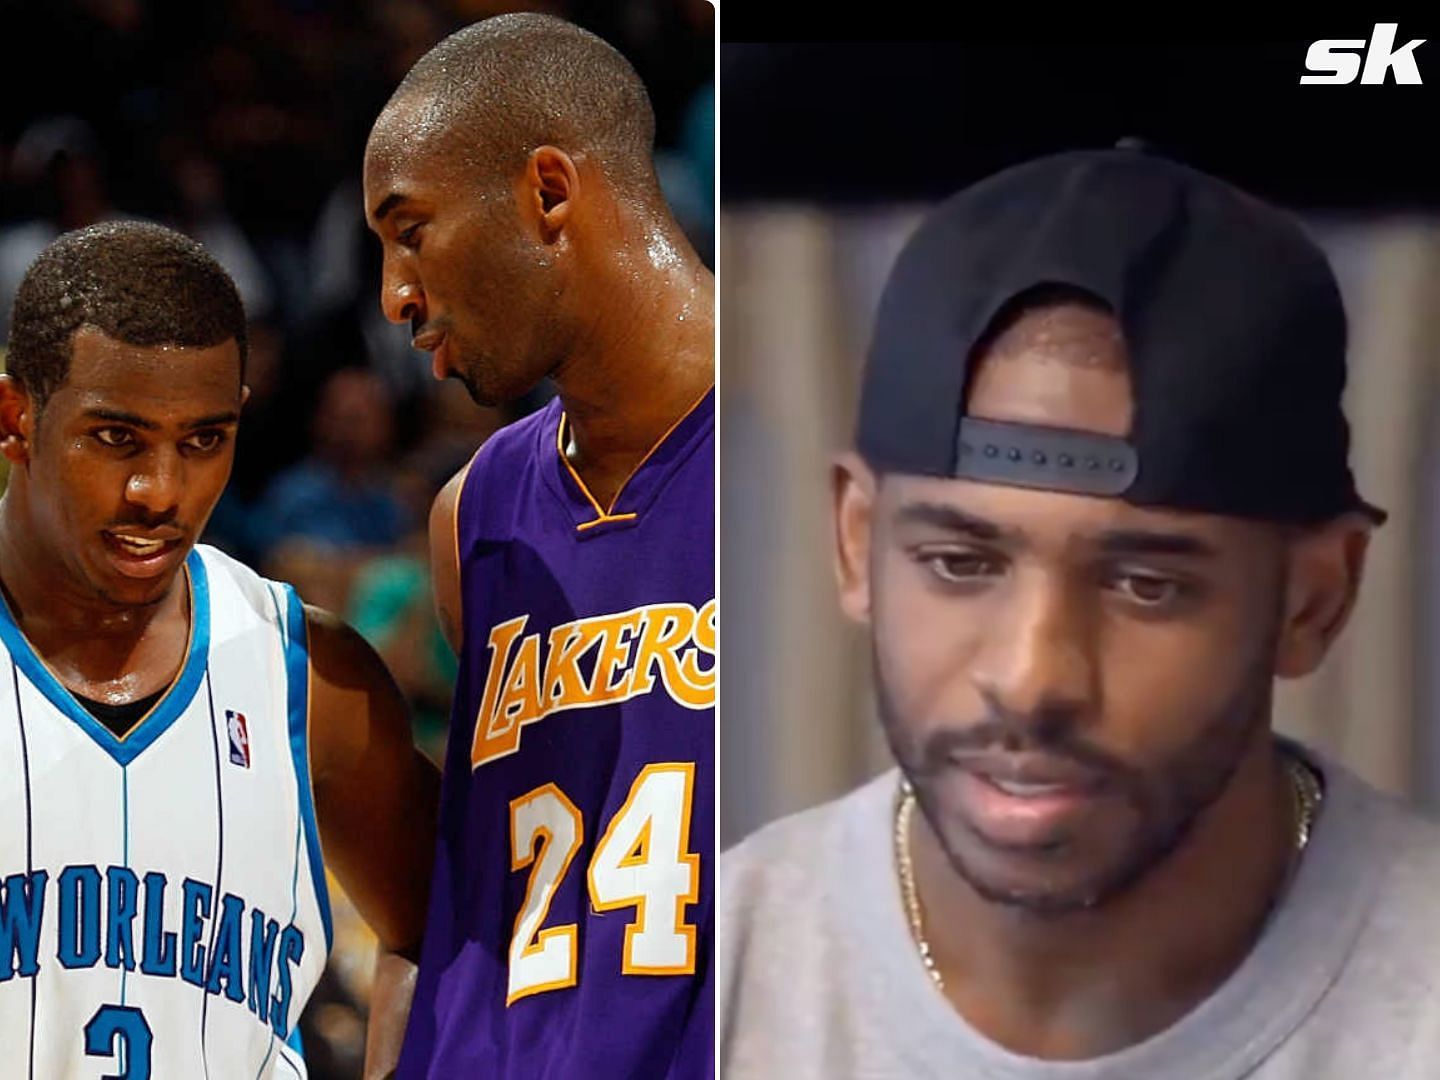 Chris Paul reflects on the missed opportunity to play with Kobe Bryant in 2011